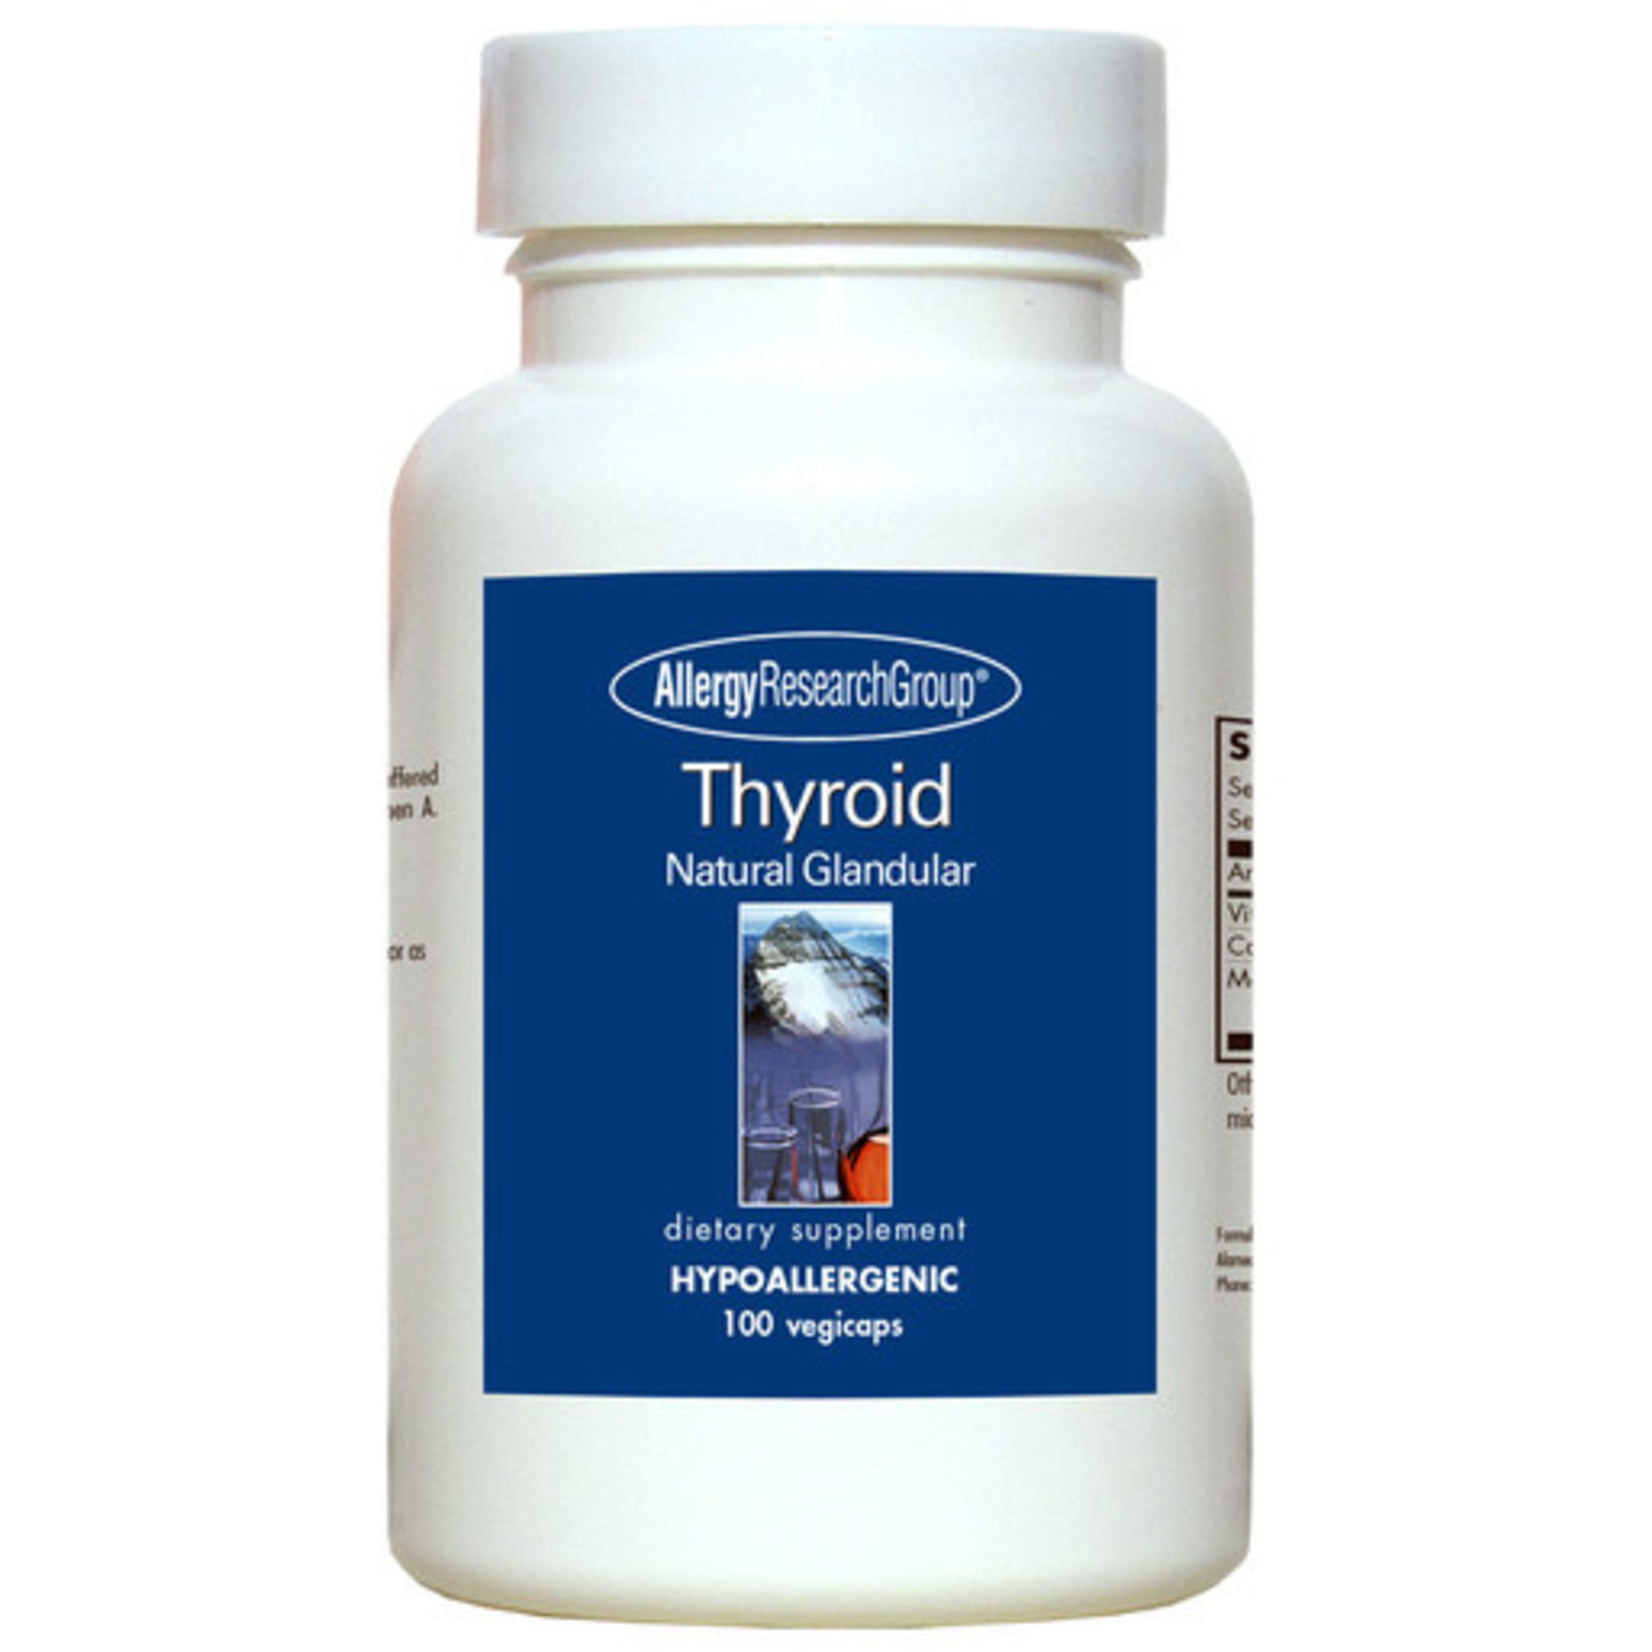 Allergy Research Group Thyroid Natural Glandular, 100 caps (Allergy Research Group)